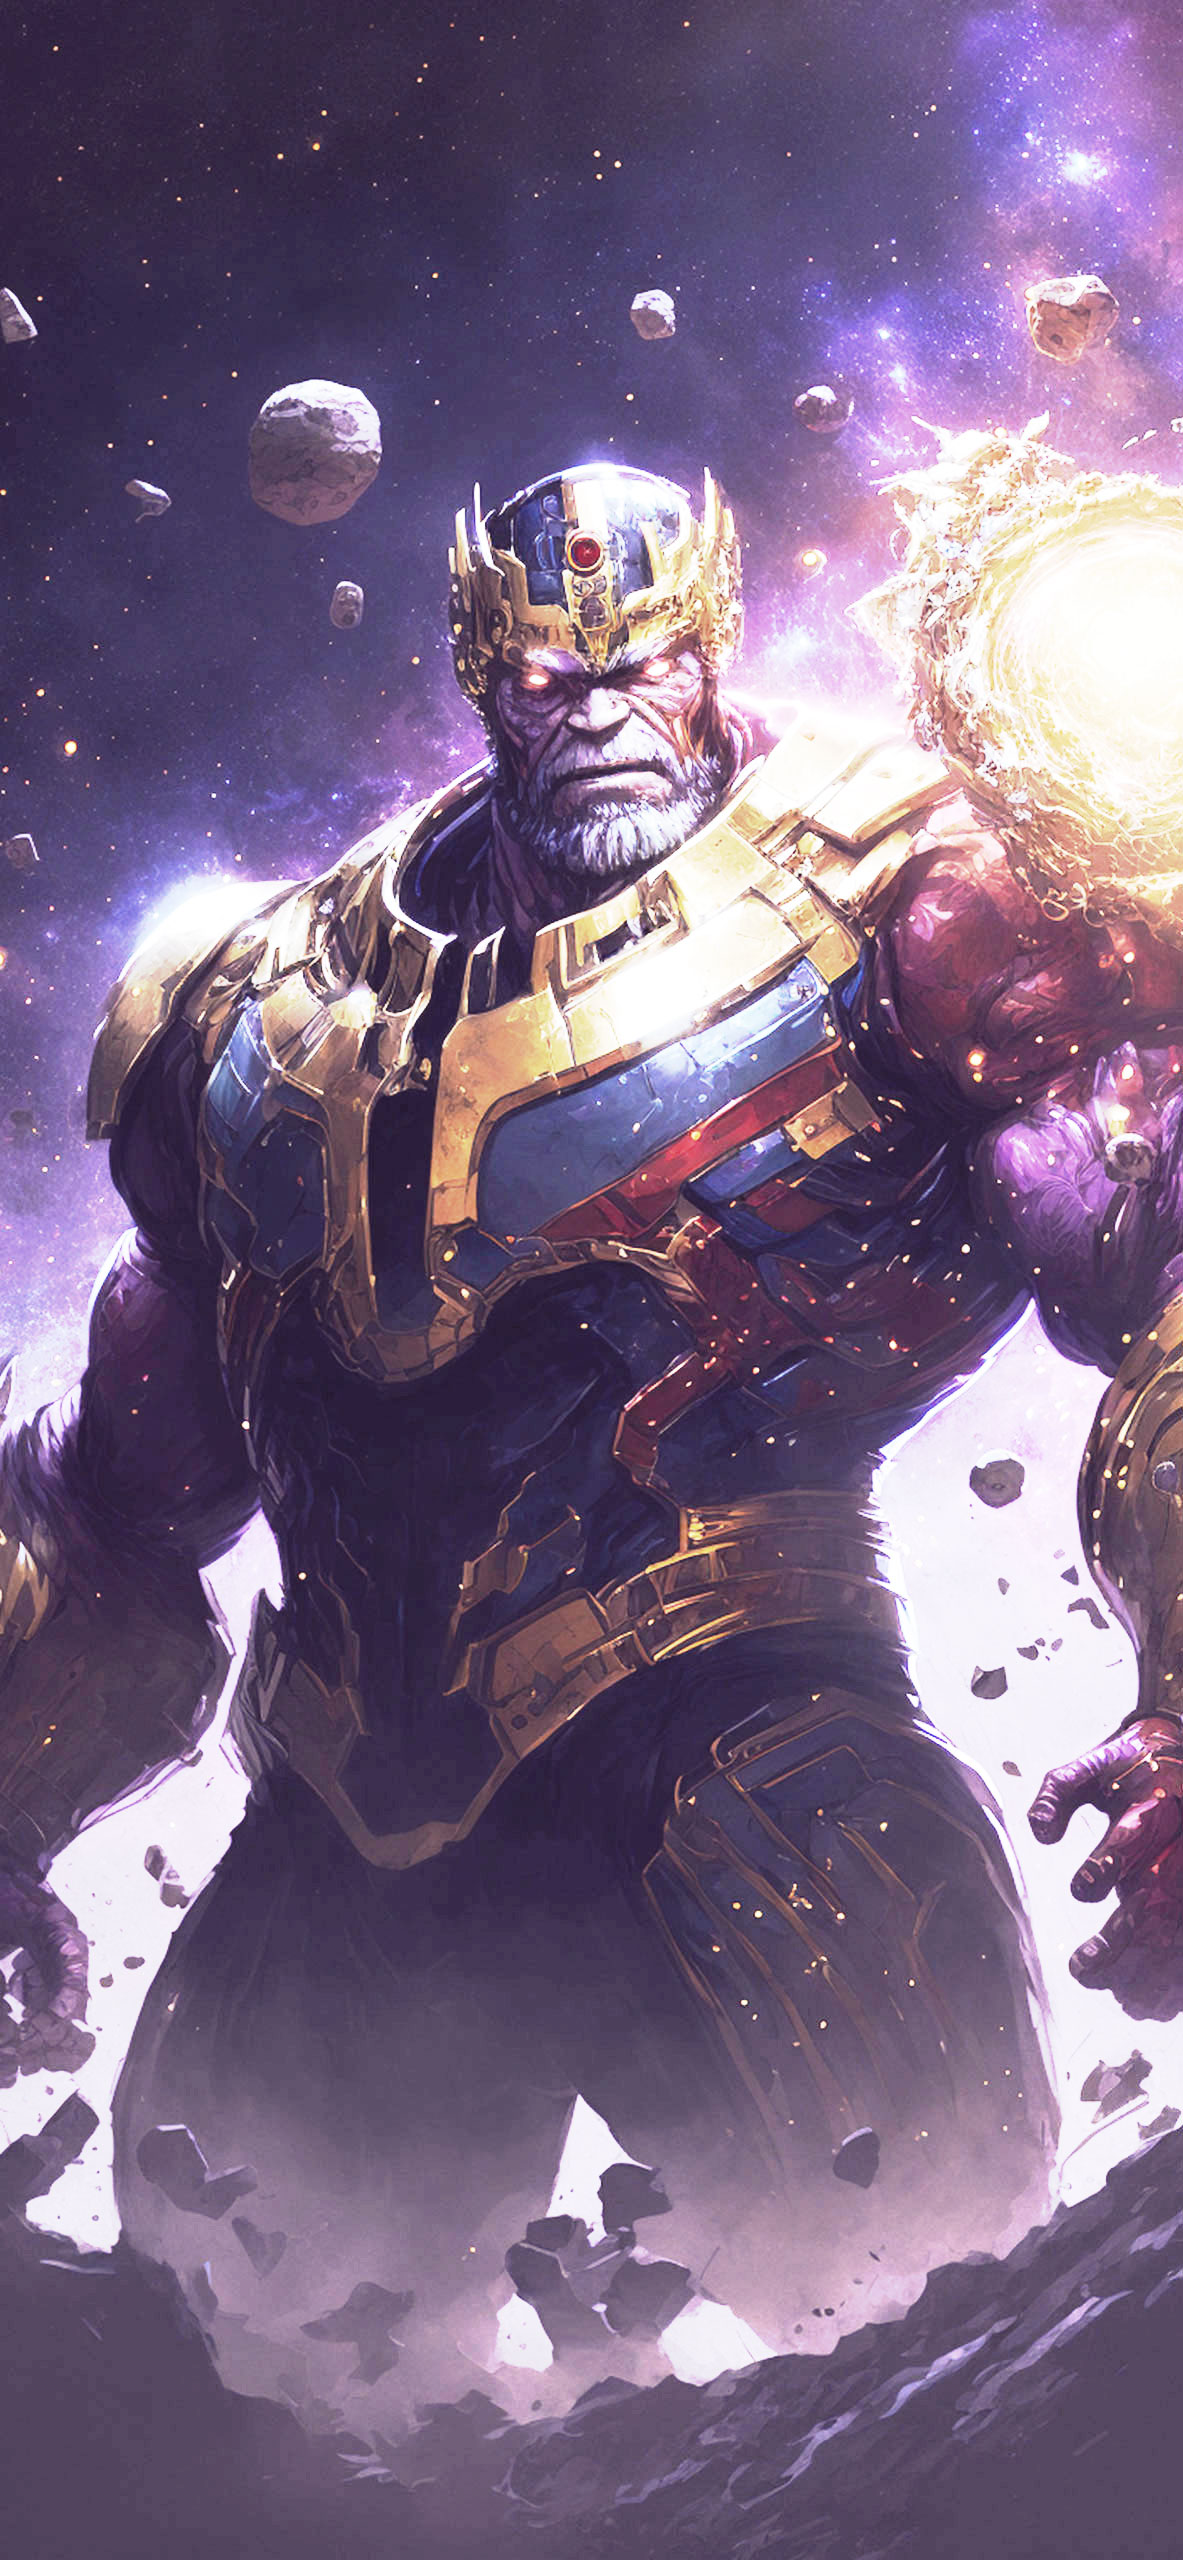 Marvel Thanos Galaxy Wallpapers - Thanos Wallpapers for iPhone